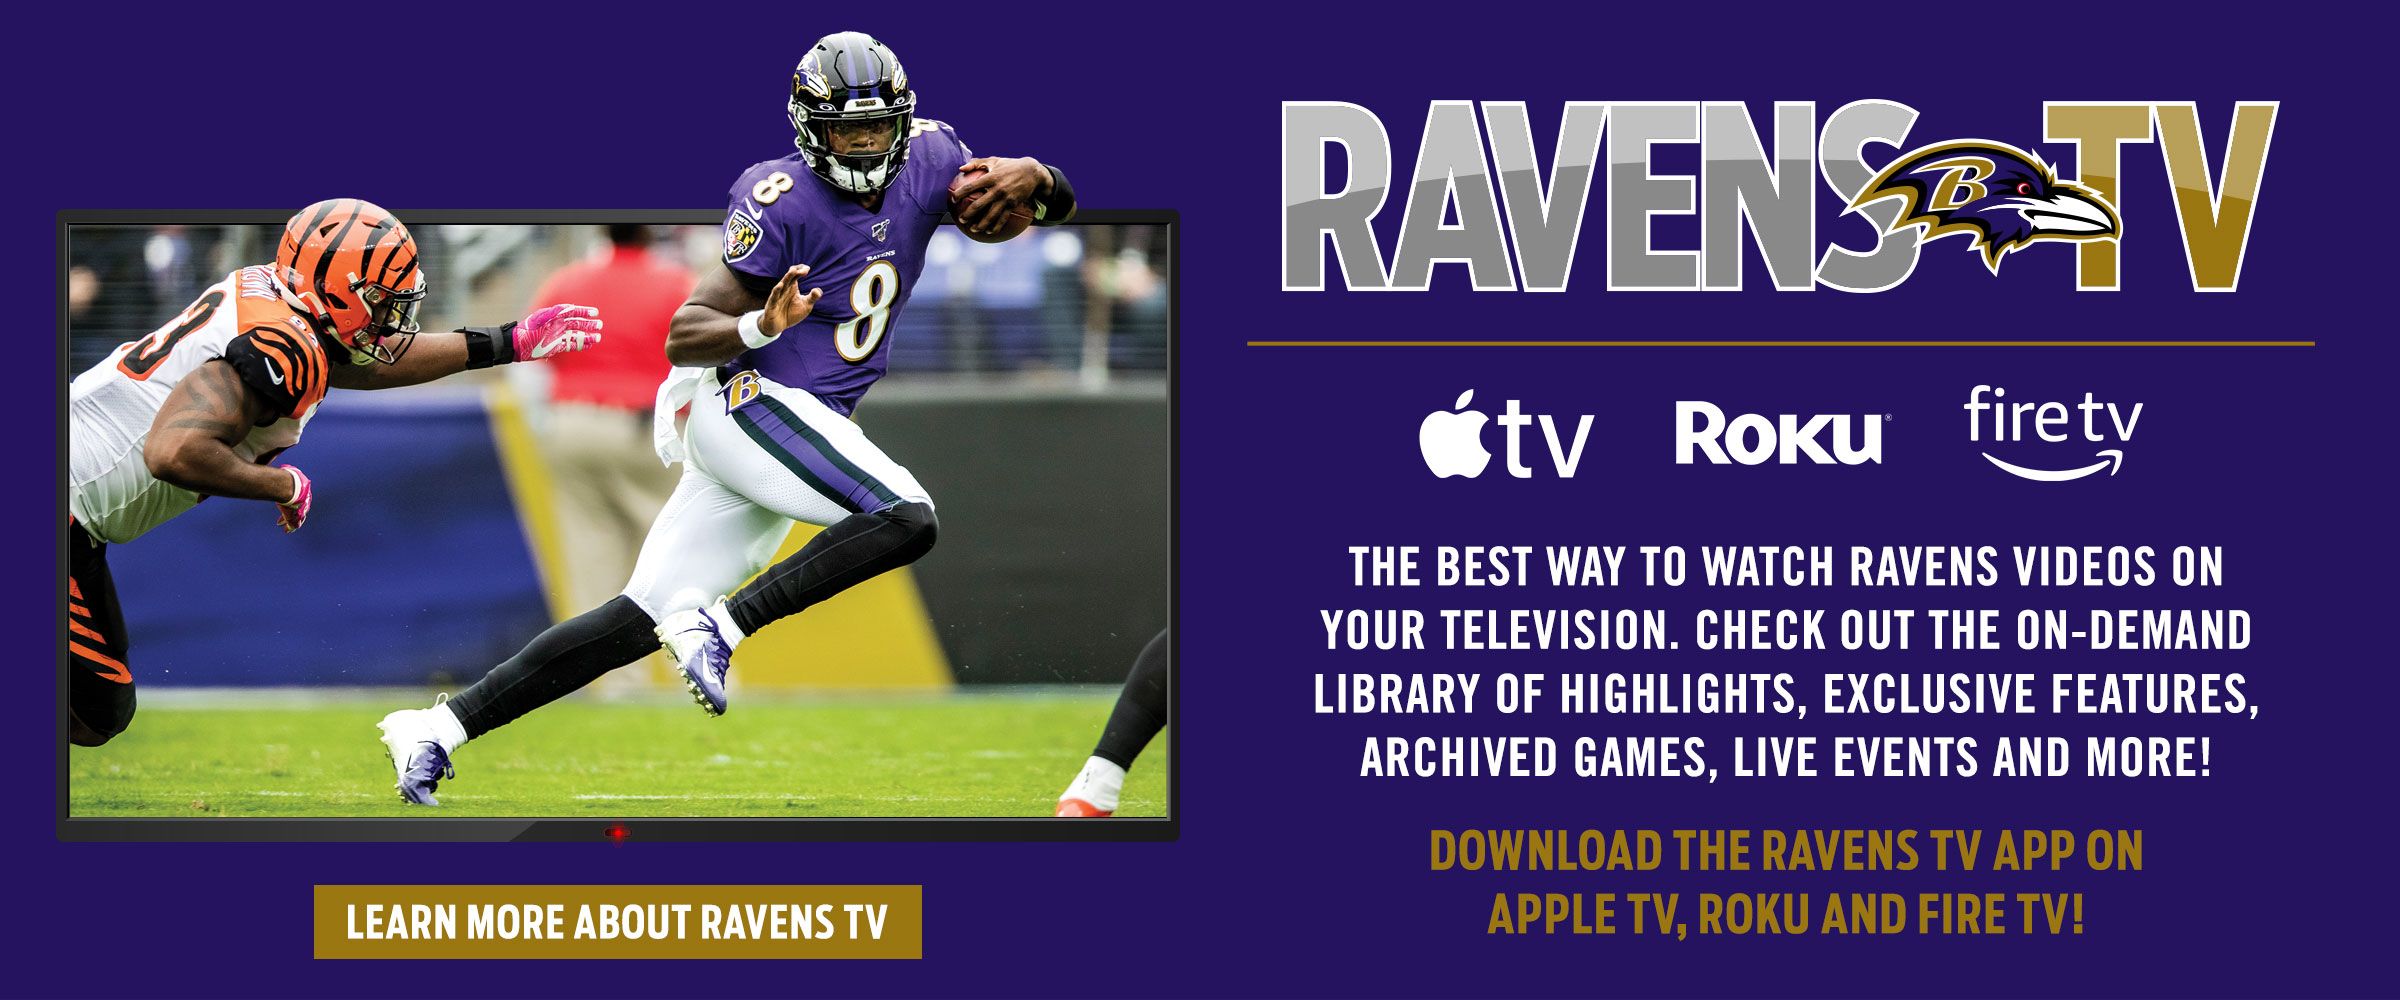 where can you watch the ravens game today